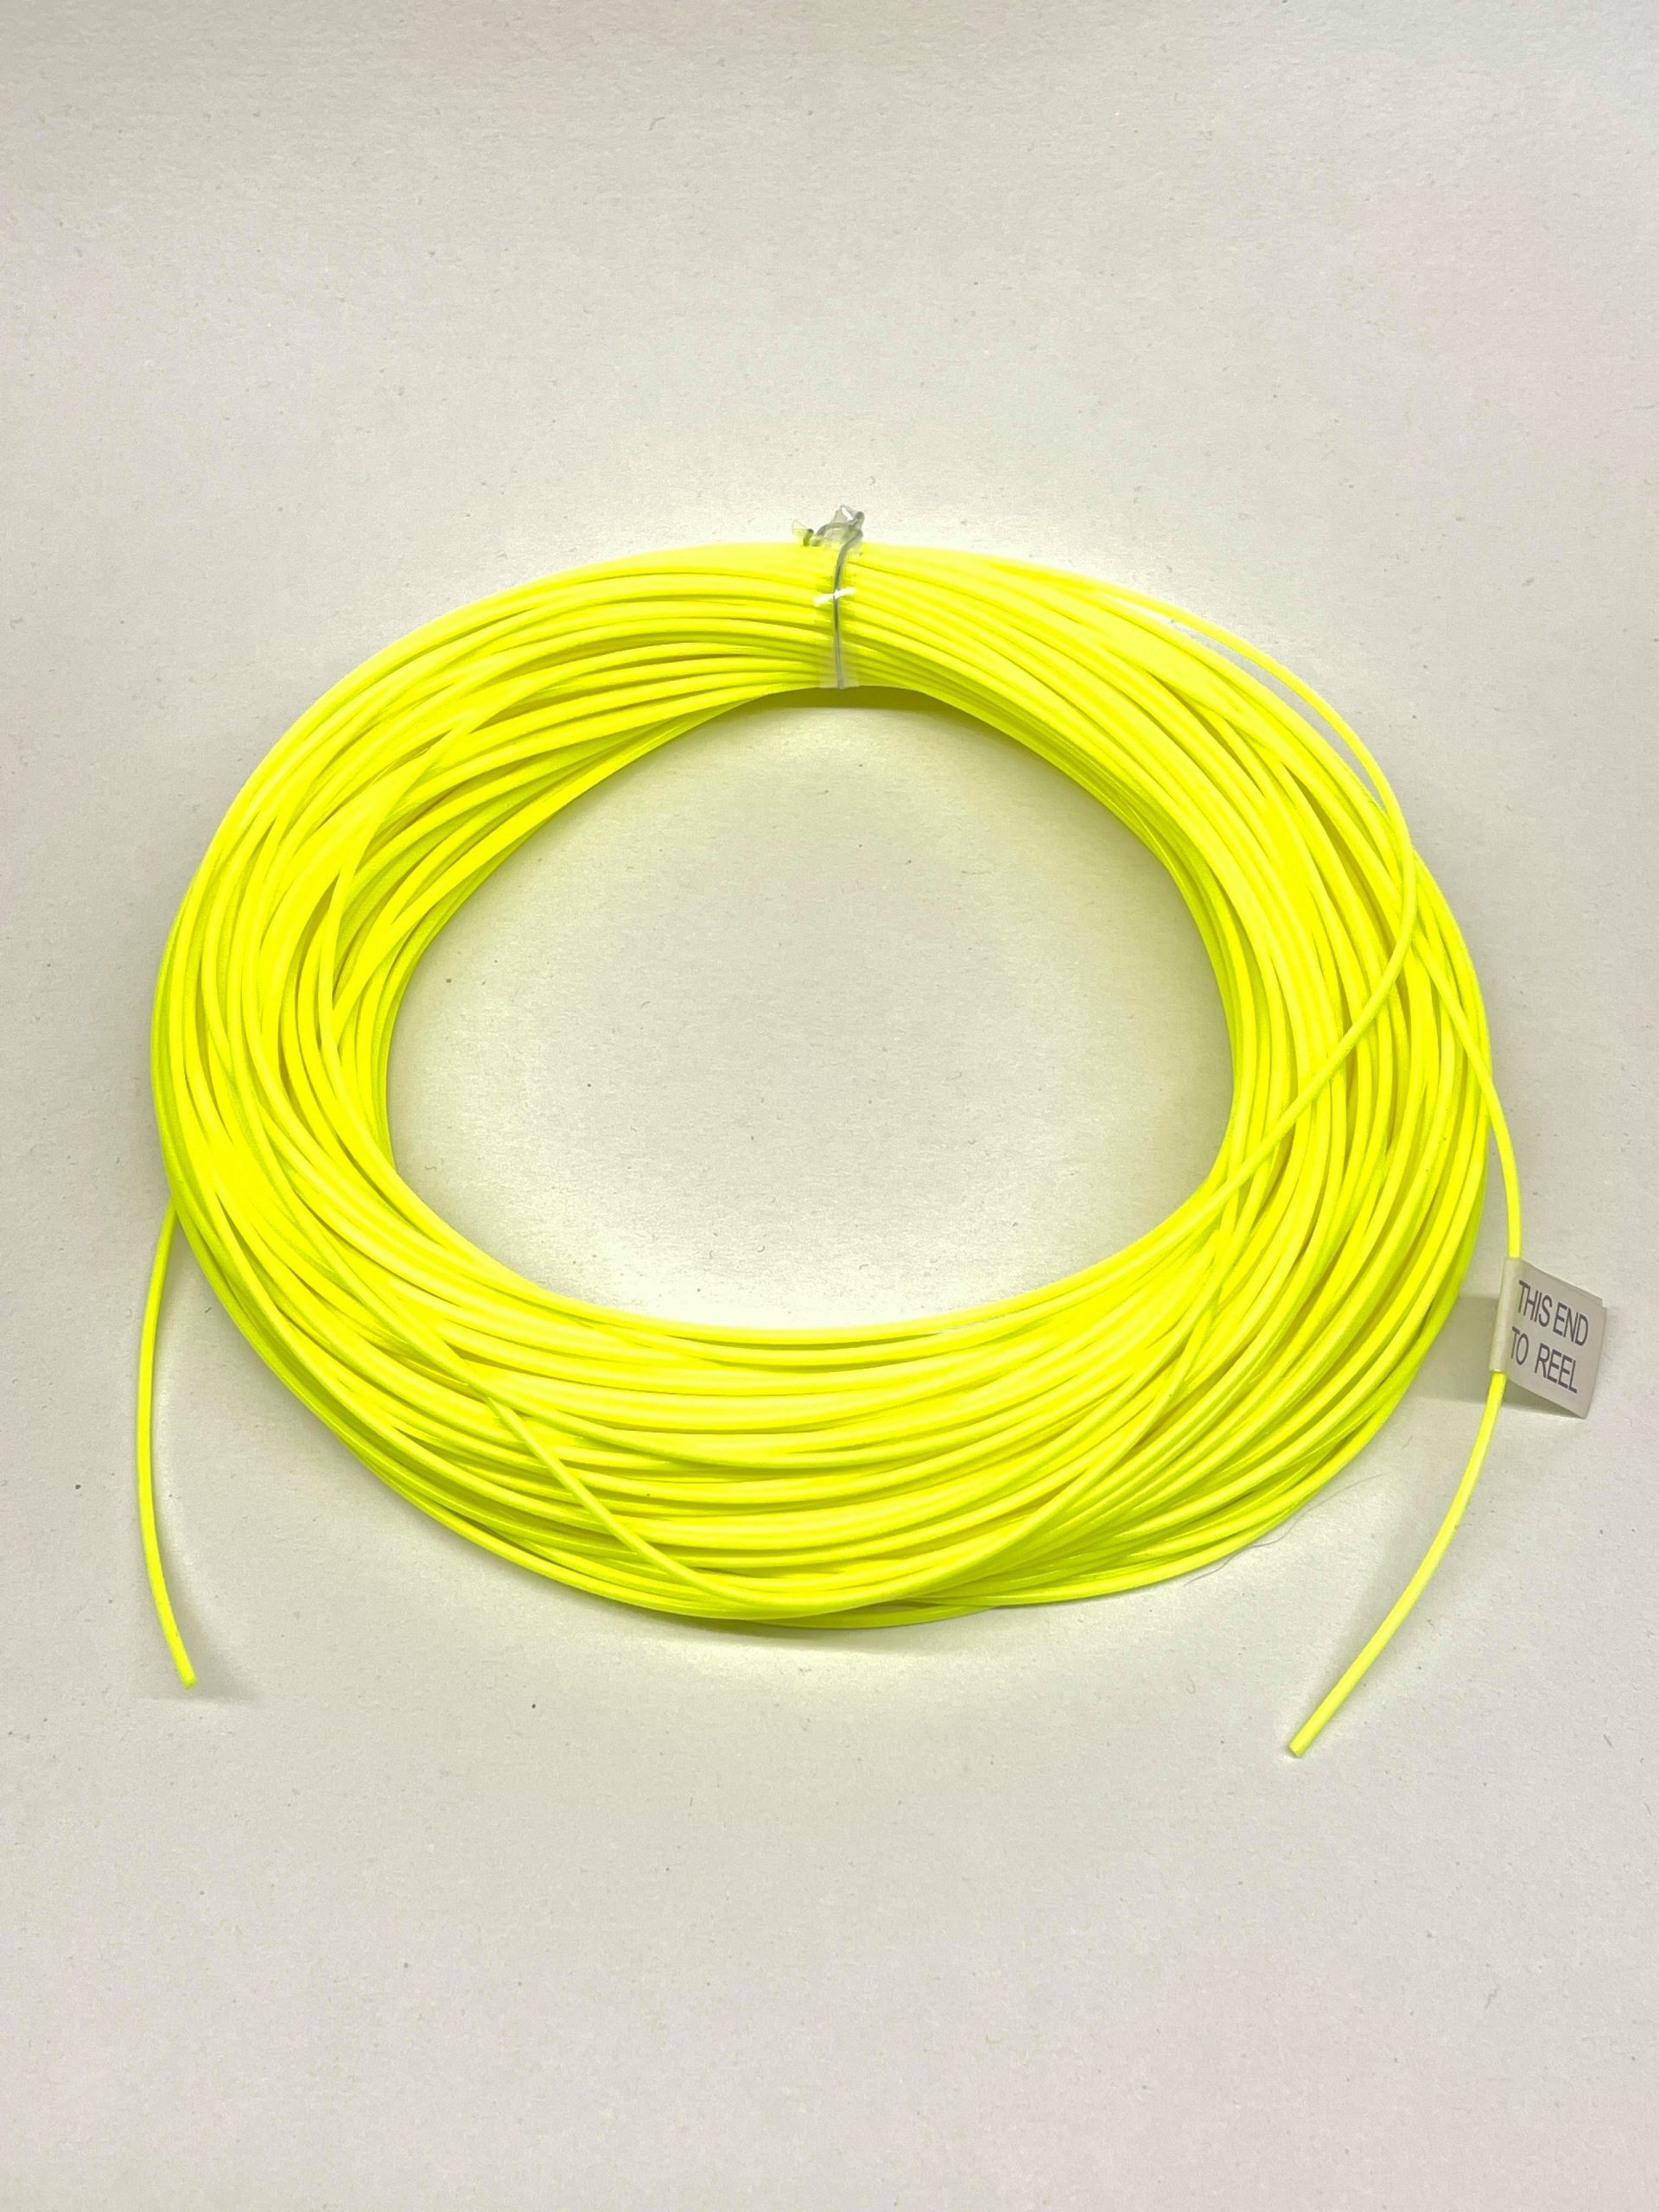 Angling Supplies WF8 Yellow Floating Fly Cast Fly line 1756 